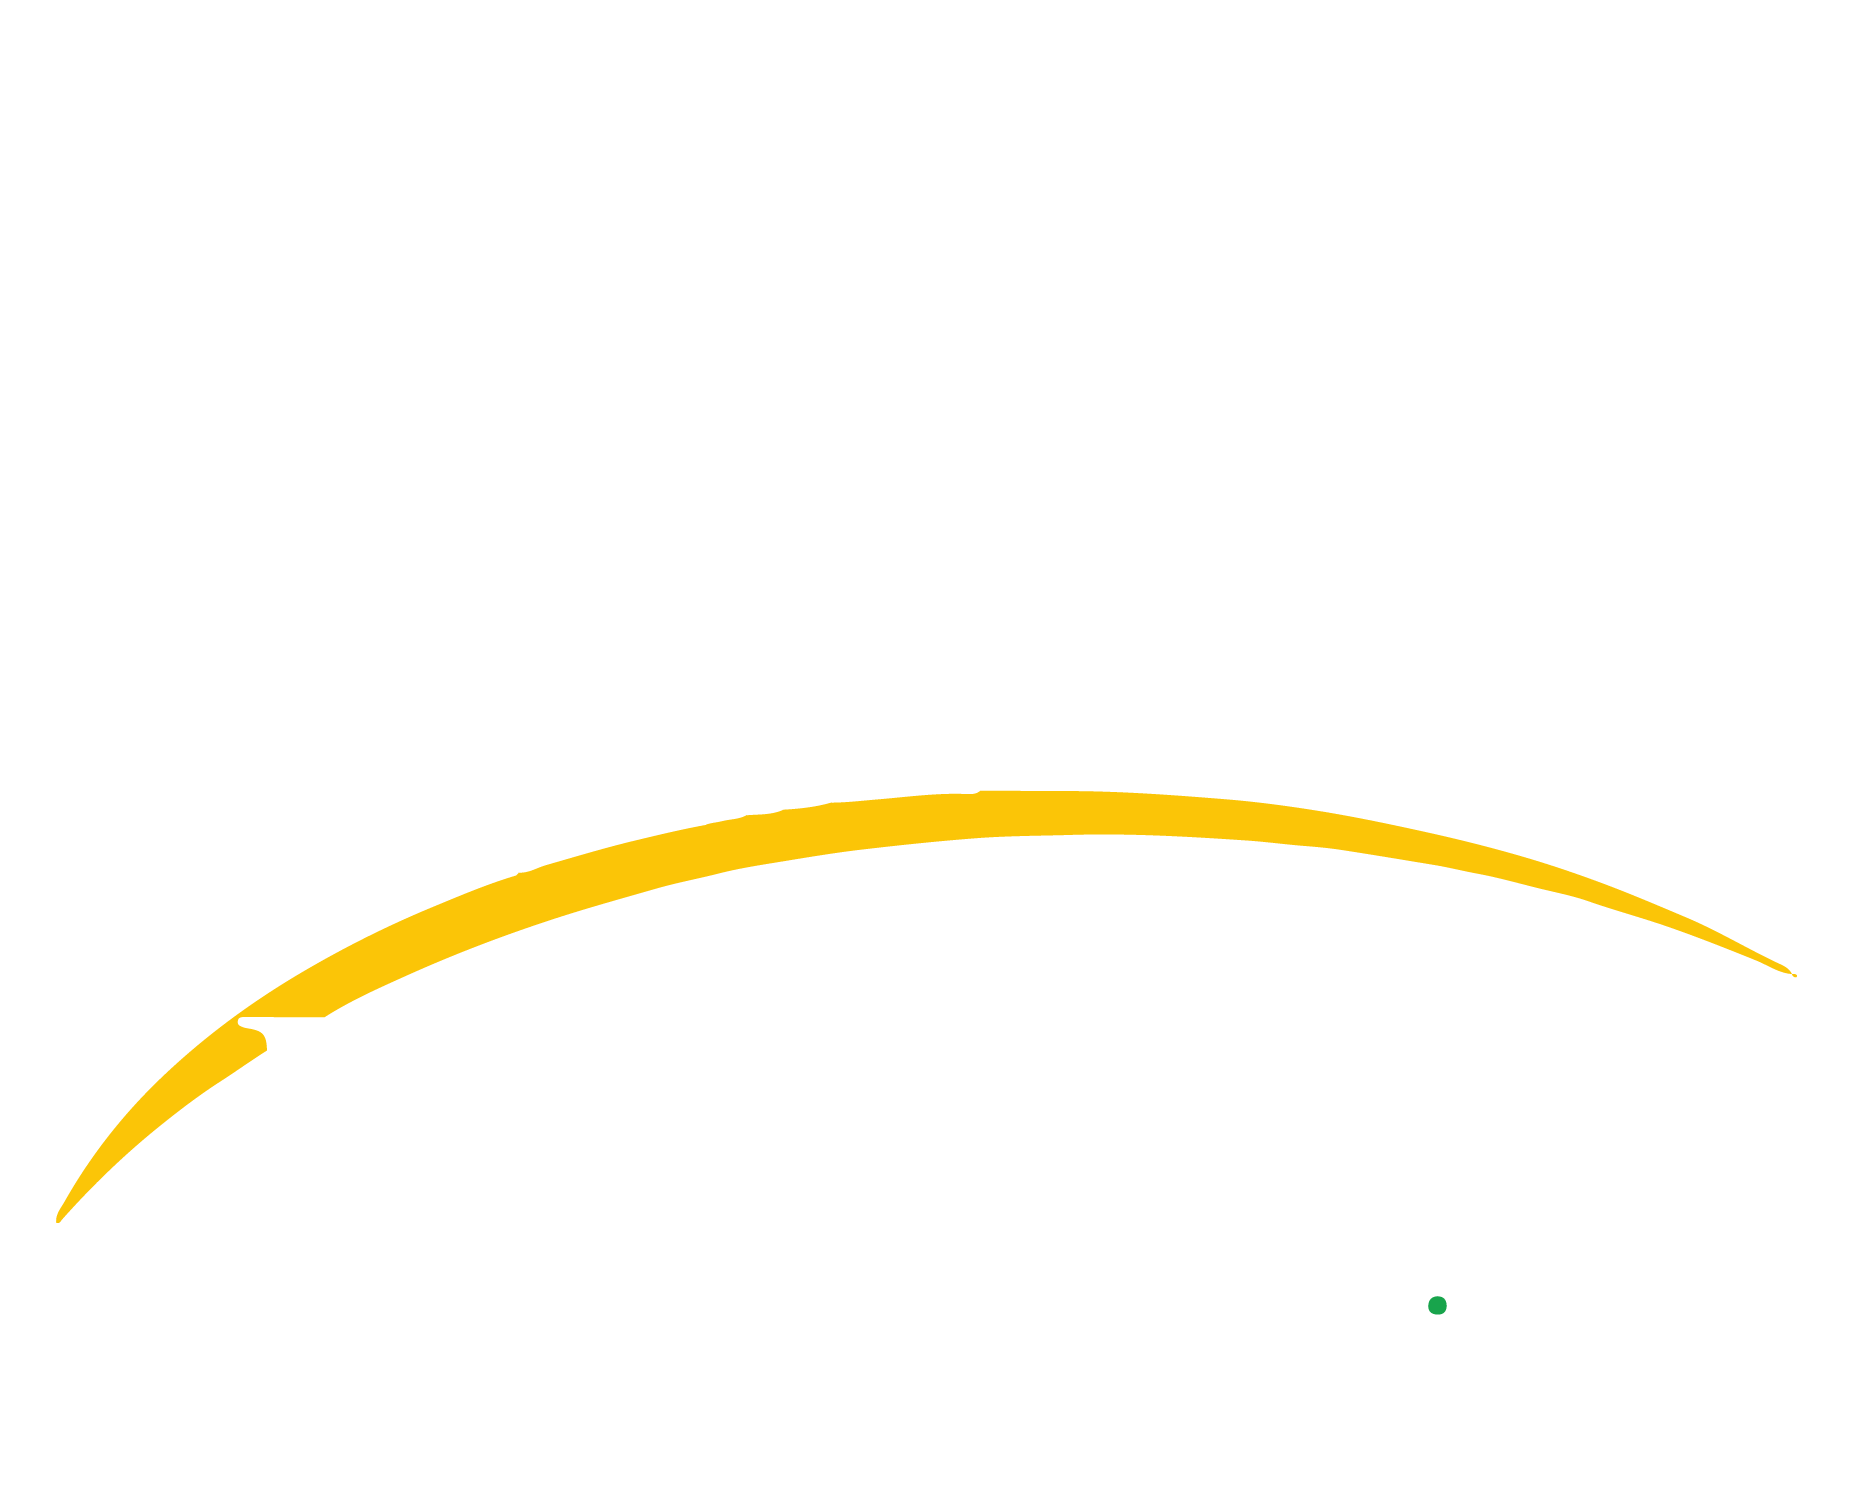 Emerge Healthcare Services